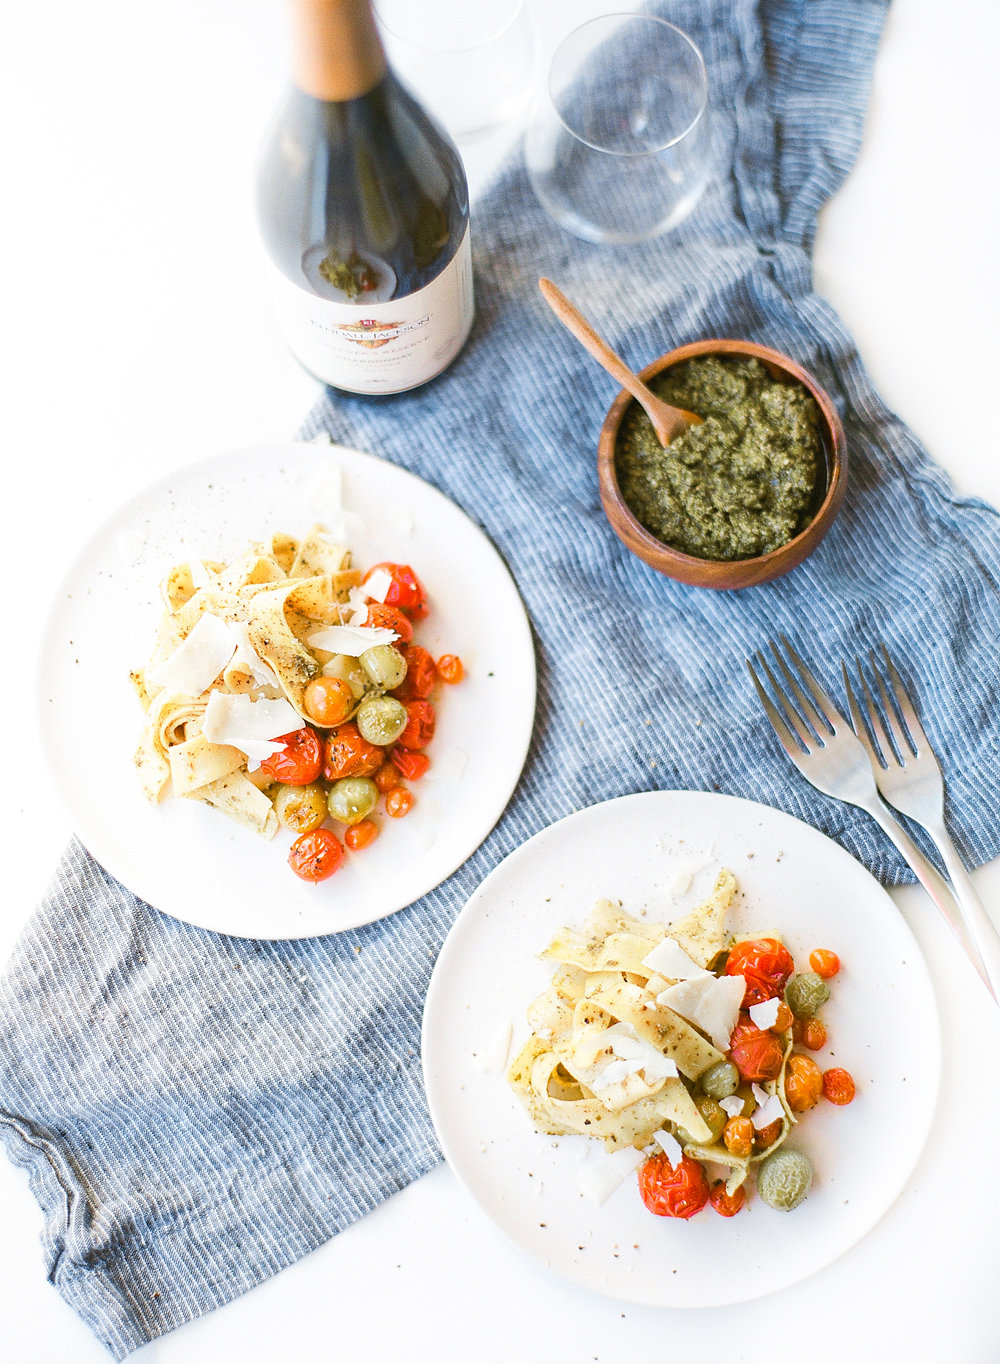 Now it's time to eat! You know the drill, pour yourself a glass of wine (we love the Kendall-Jackson Vintner's Reserve Chardonnay) and step to it. This Lemon Verbena Basil Pesto pasta dish is absolutely divine and it's the perfect introduction to your new #DIY herb garden..